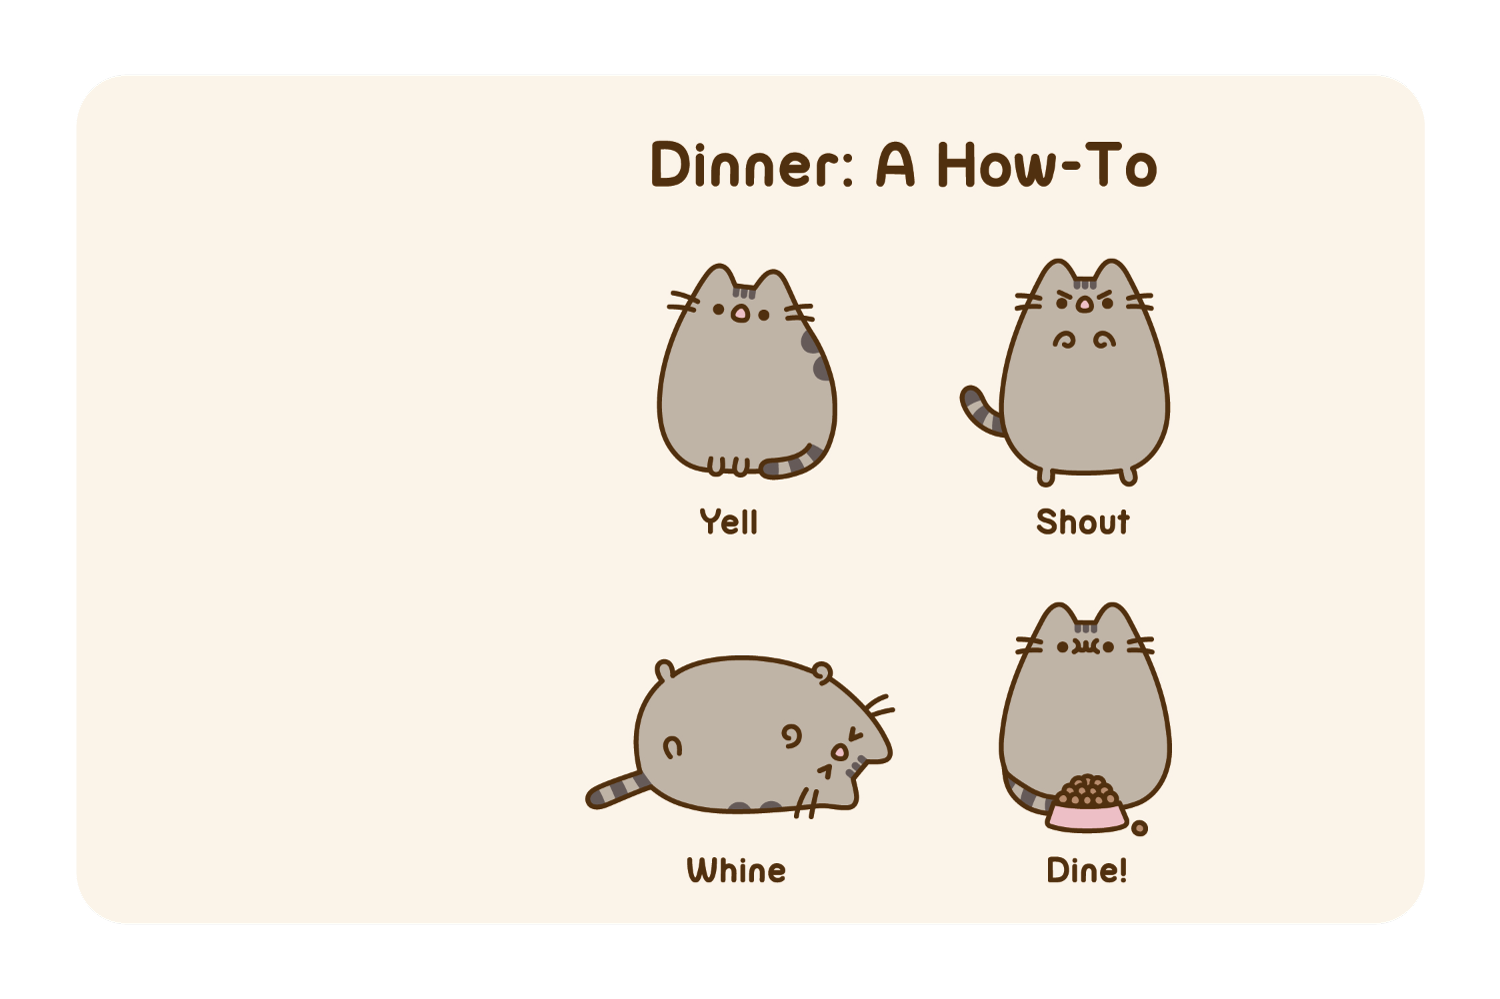 Dinner: A how-to